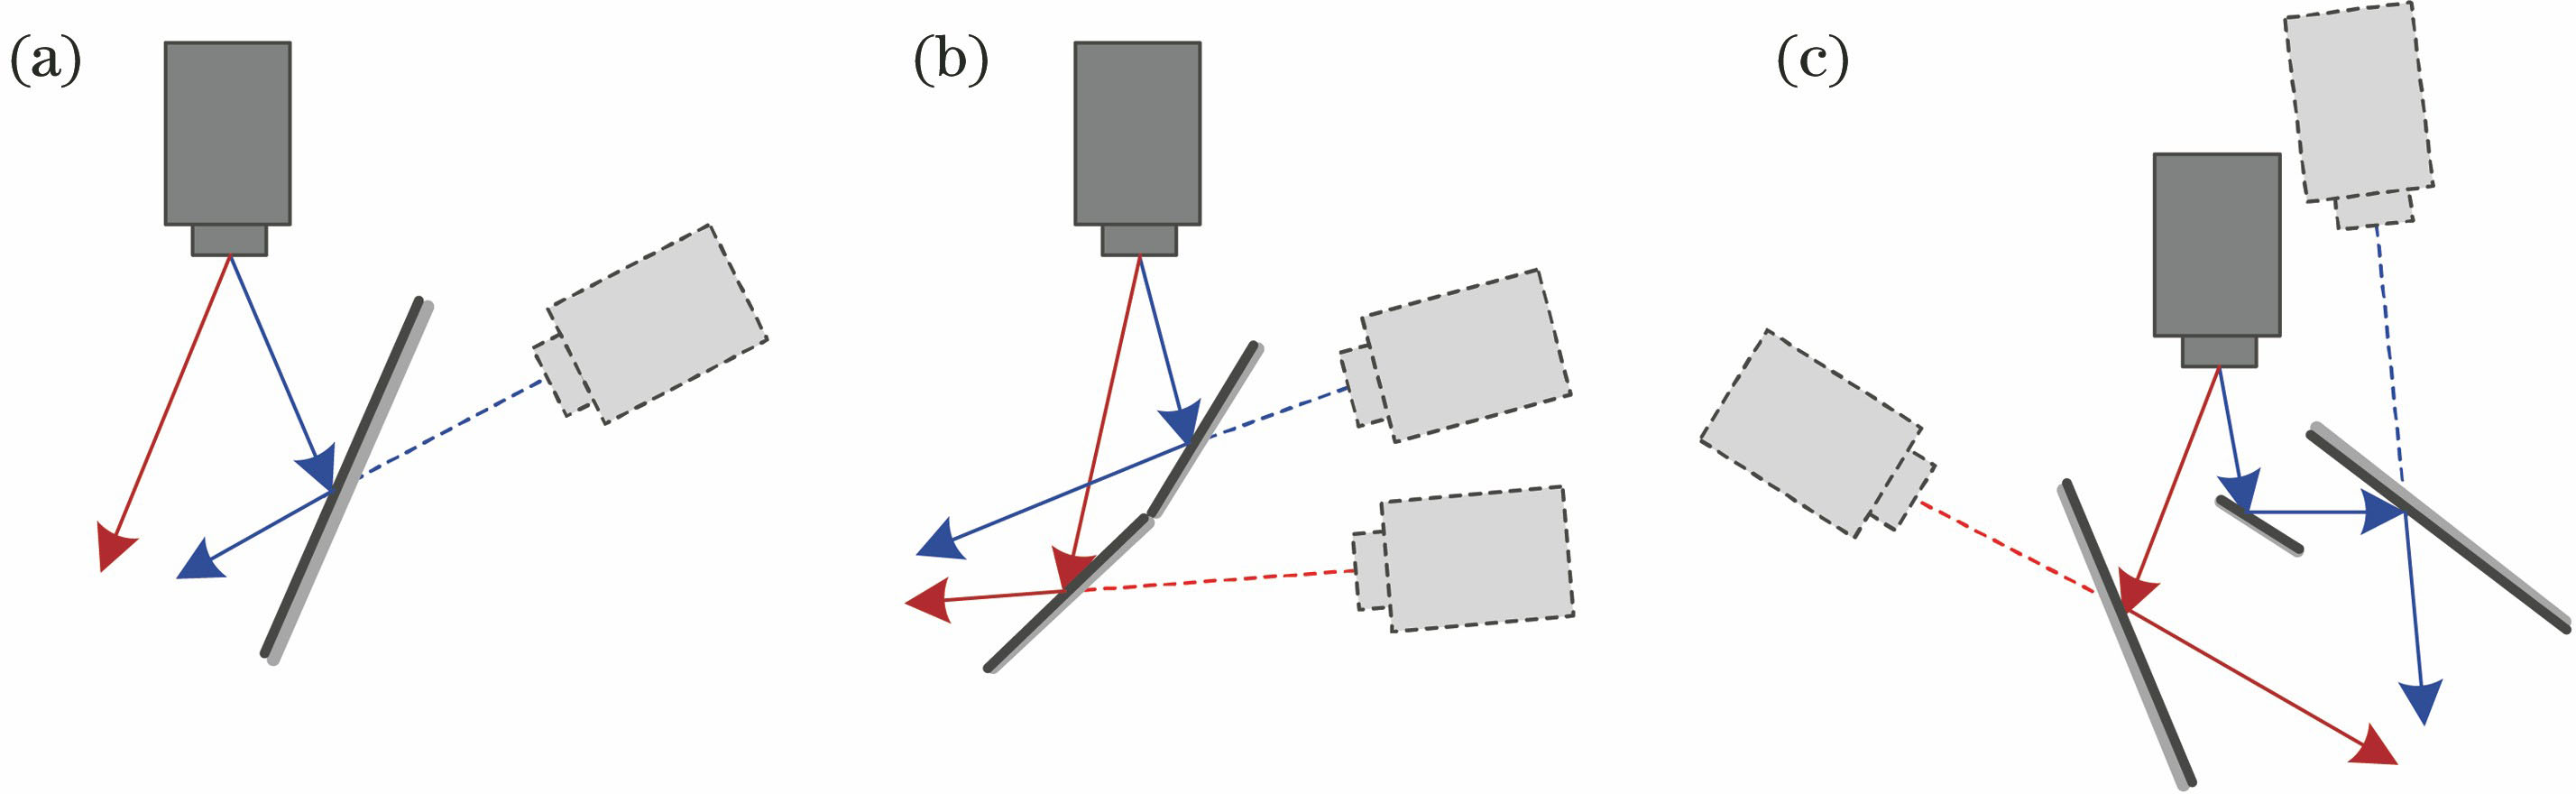 Structure of typical catadioptric asymmetry plane mirror binocular vision system. (a) Single camera and a mirror; (b) single camera and a pair of plane mirrors; (c) single camera and a group of plane mirrors